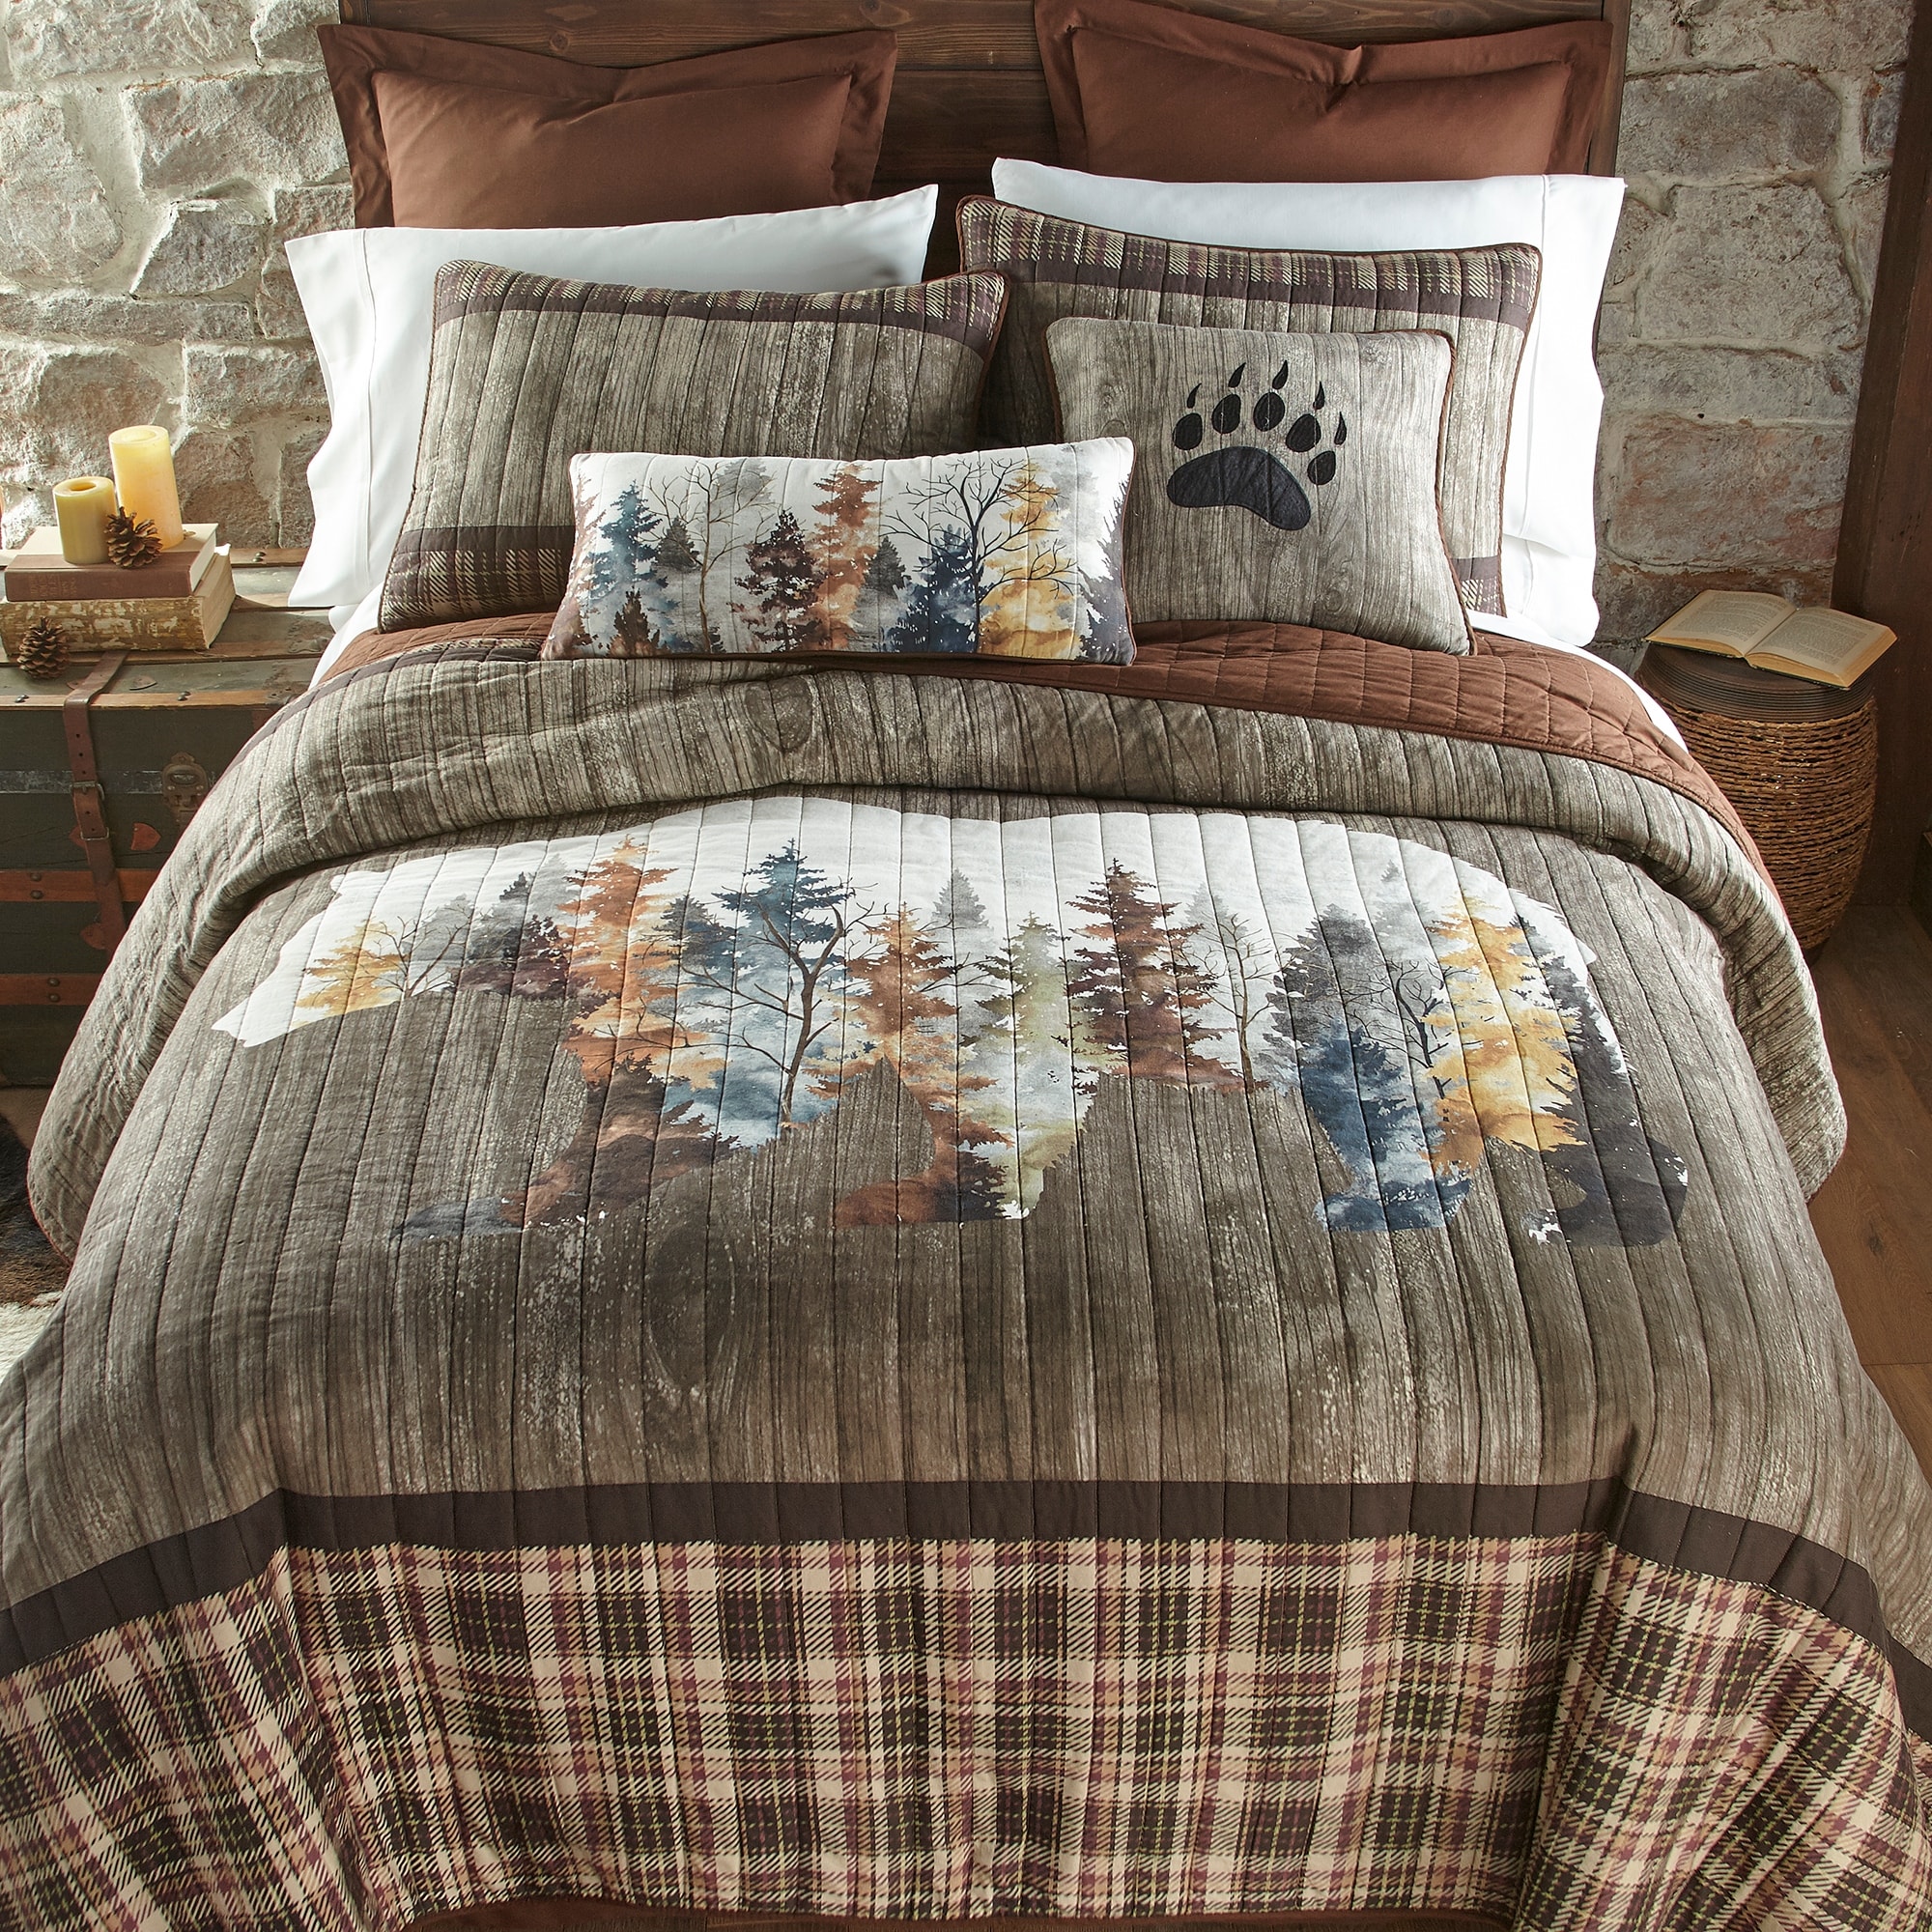 https://ak1.ostkcdn.com/images/products/is/images/direct/f5ea9659168d61162cb90564ee01cf880f5cfad2/Donna-Sharp-Bear-Mirage-Cotton-Quilted-Bedding-Collection.jpg